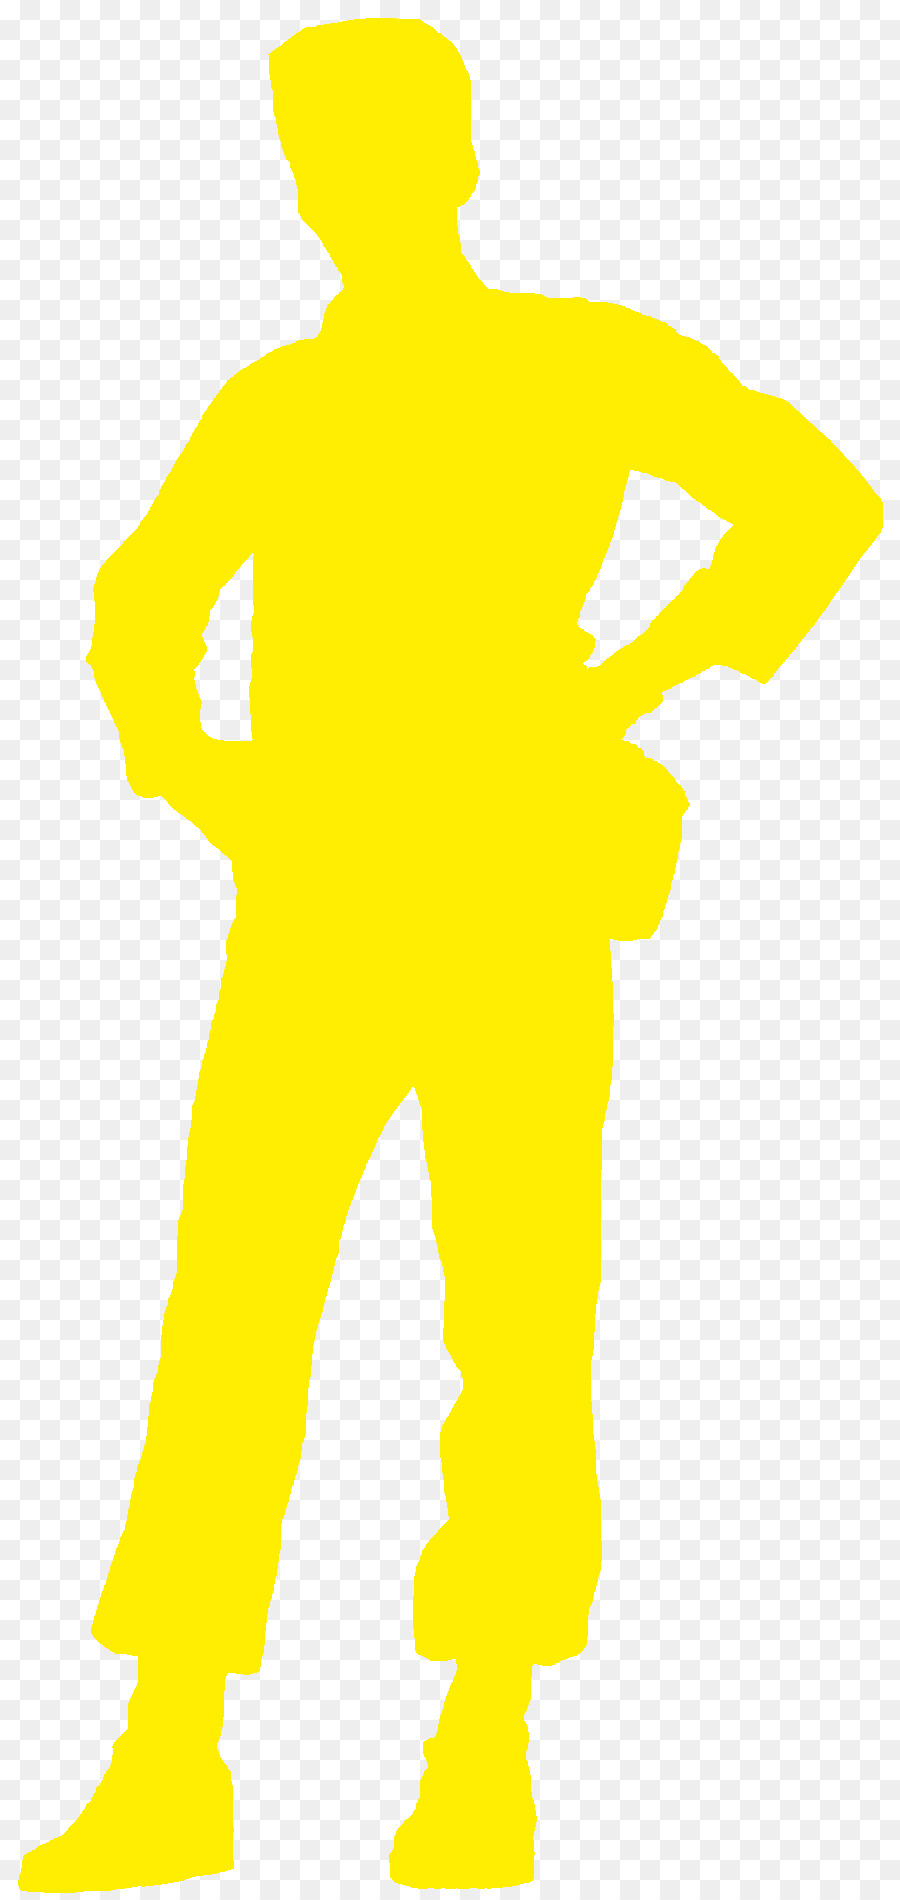 G.I. Blues Yellow Wall decal Clip art - Elvis Presley png download - 893*1897 - Free Transparent Gi Blues png Download.